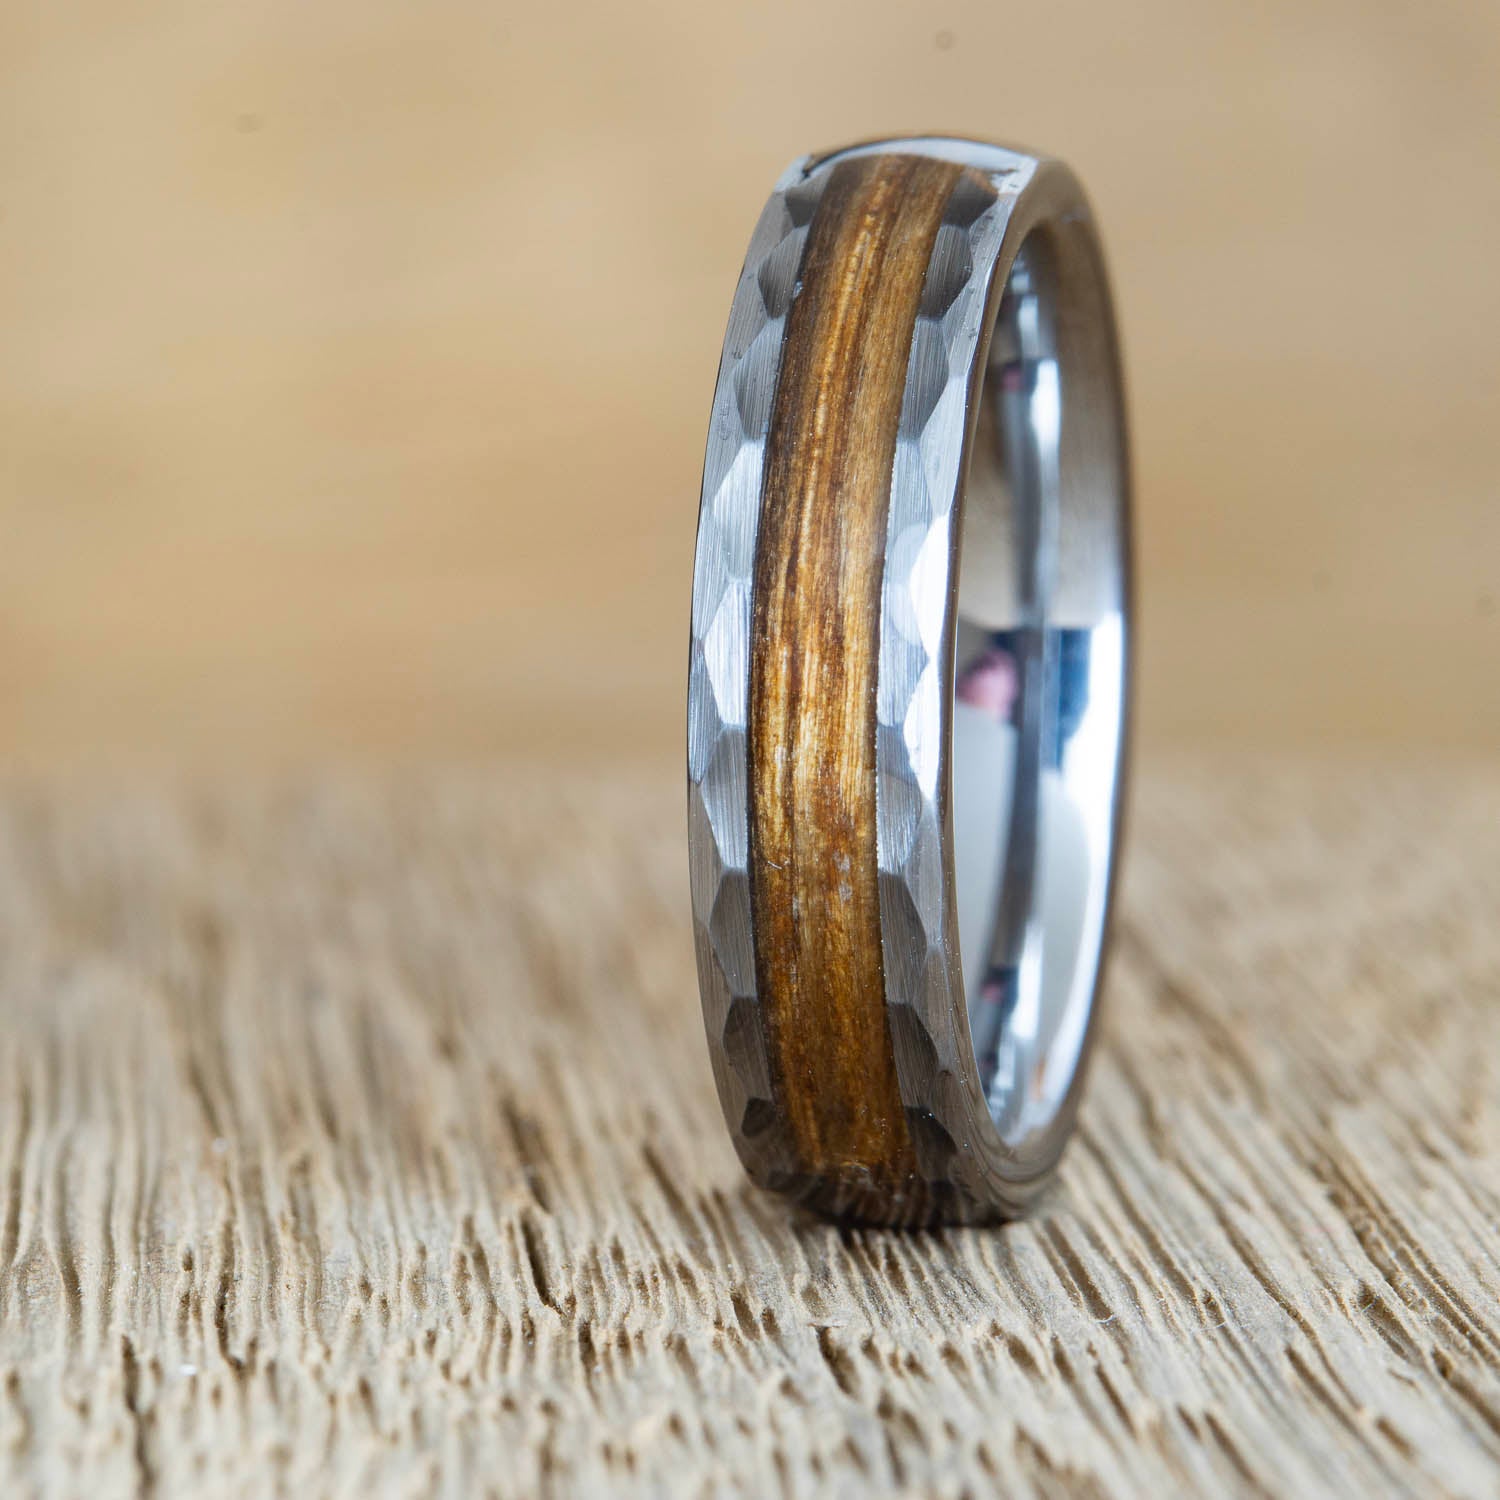 "The whiskey shot" Hammered Tungsten ring with whiskey barrel wood inlay